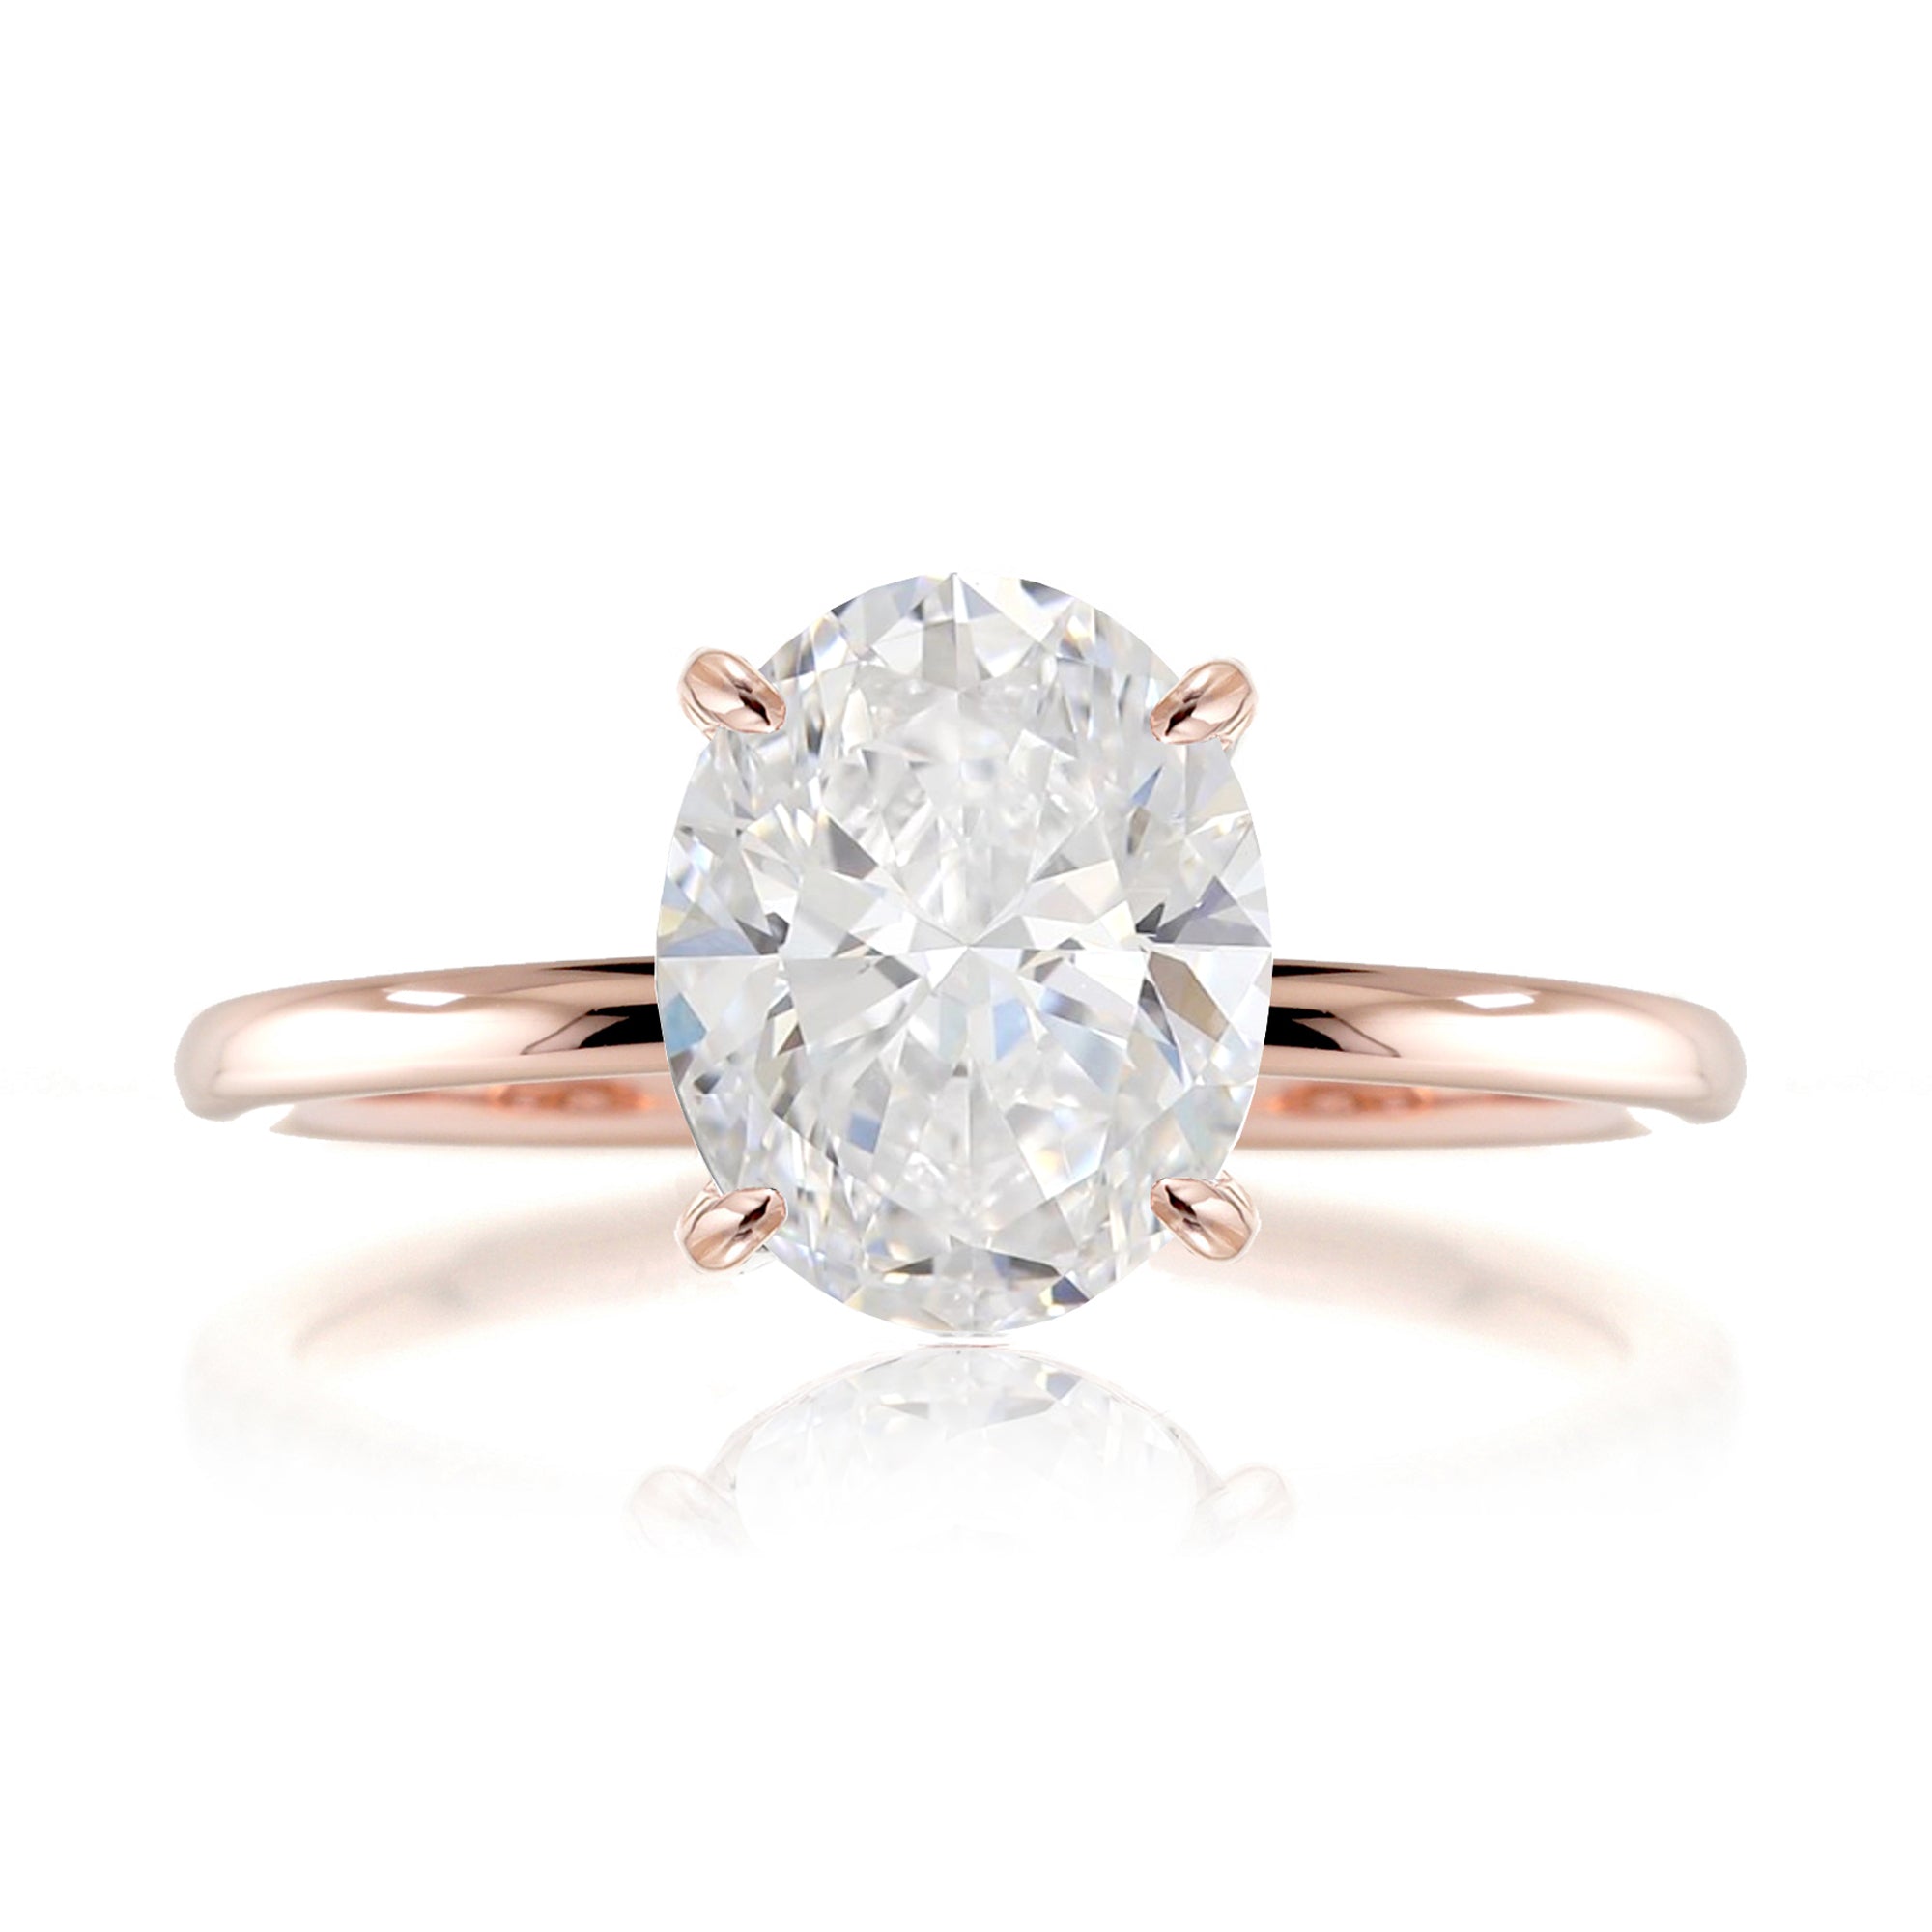 Oval cut lab-grown diamond engagement ring rose gold - The Ava solid band